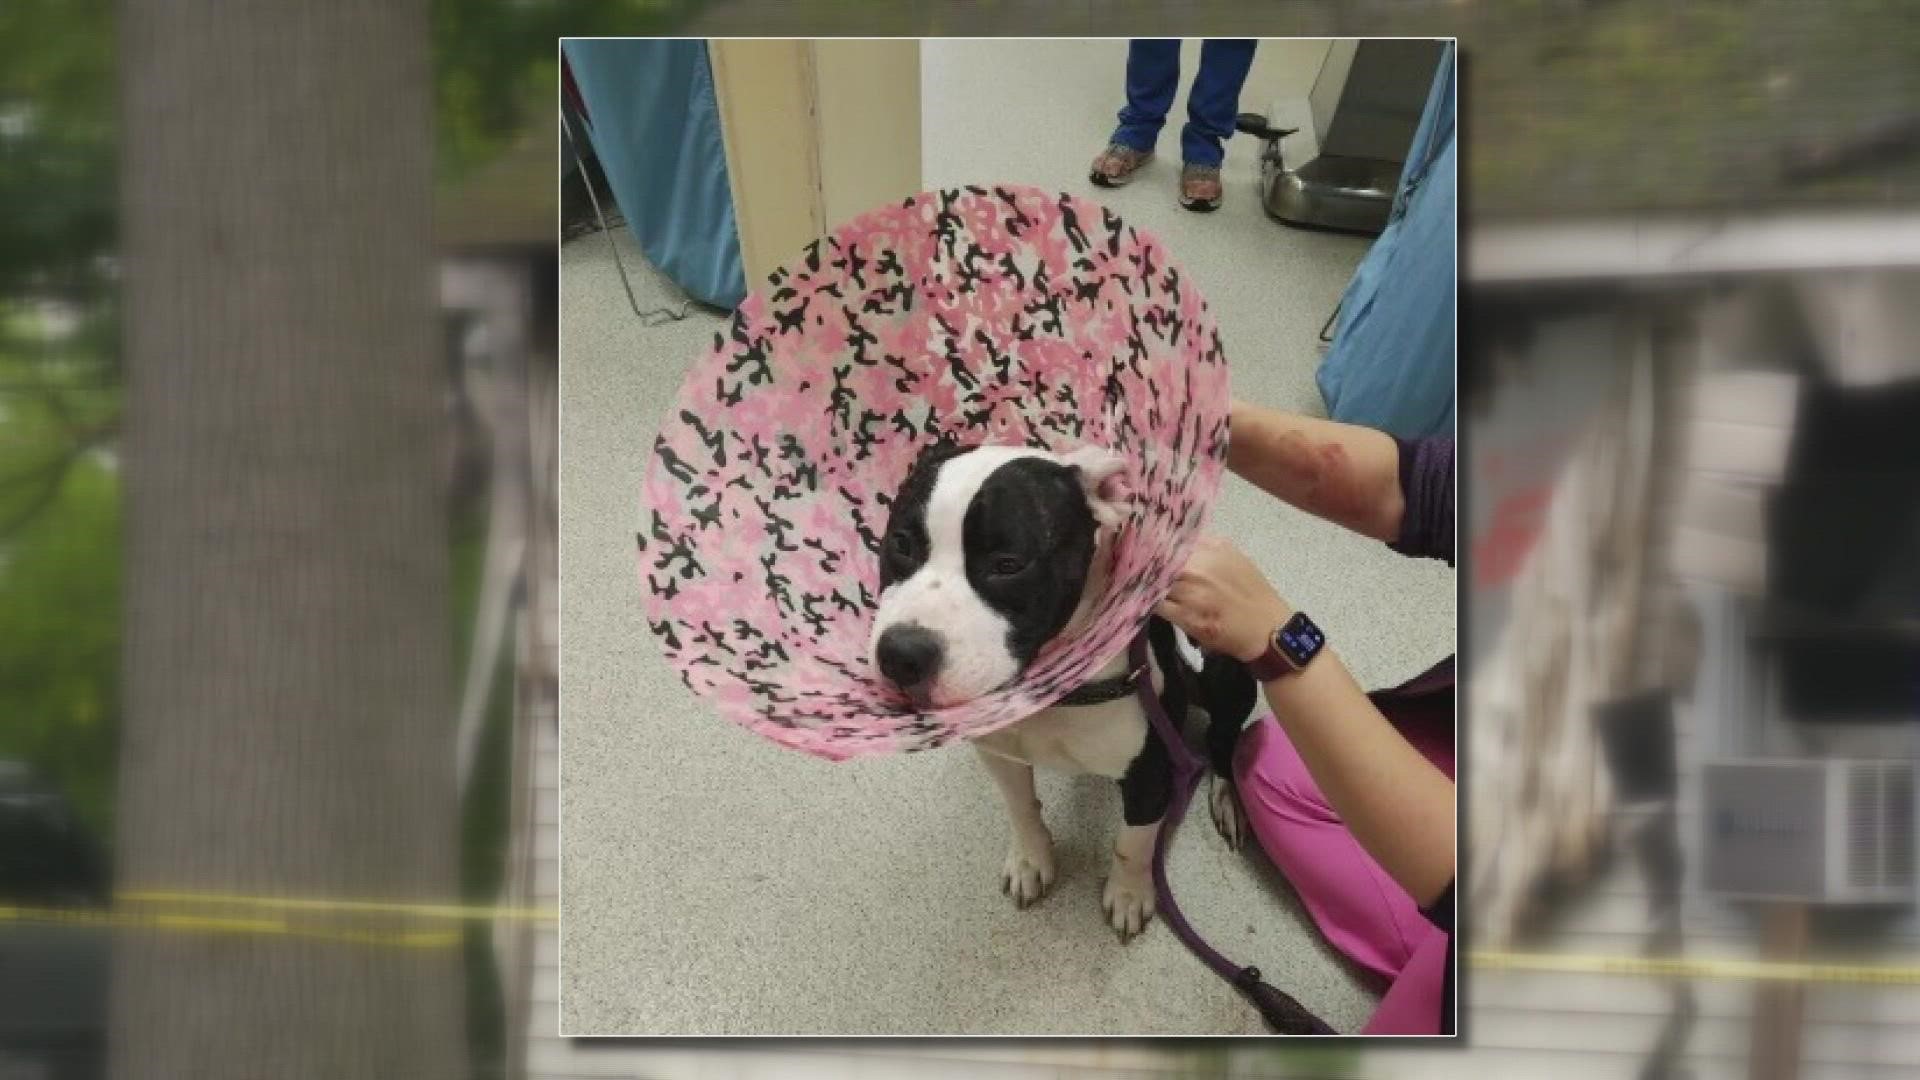 While the home is a total loss, Cookie, the dog that was shot, will heal from her injures.